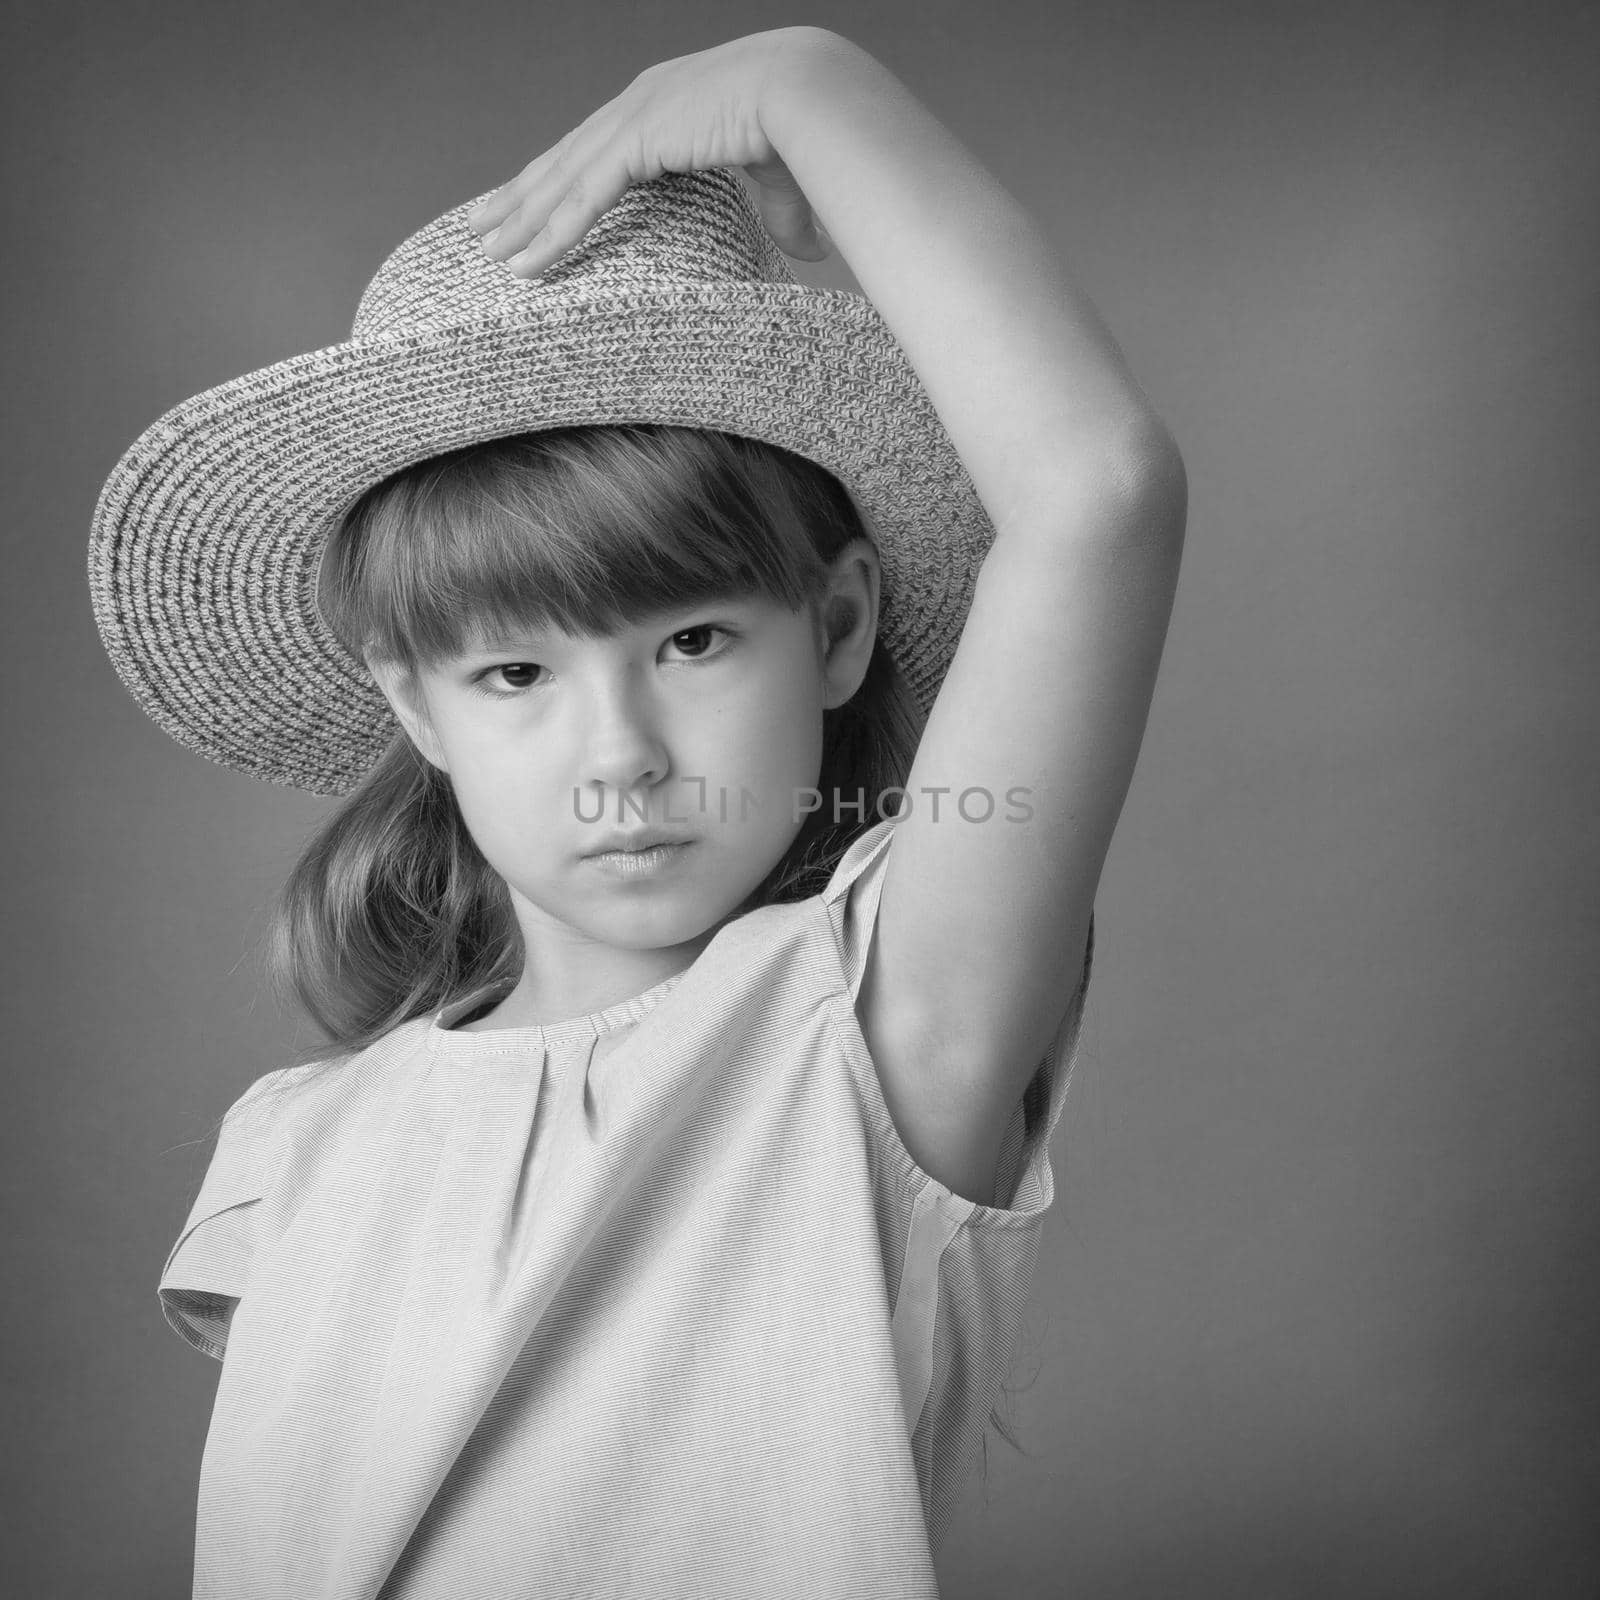 Close up portrait of cute girl in straw hat. Black and white shot of preteen child posing half turned to the camera. Lovely girl looking seriously at camera